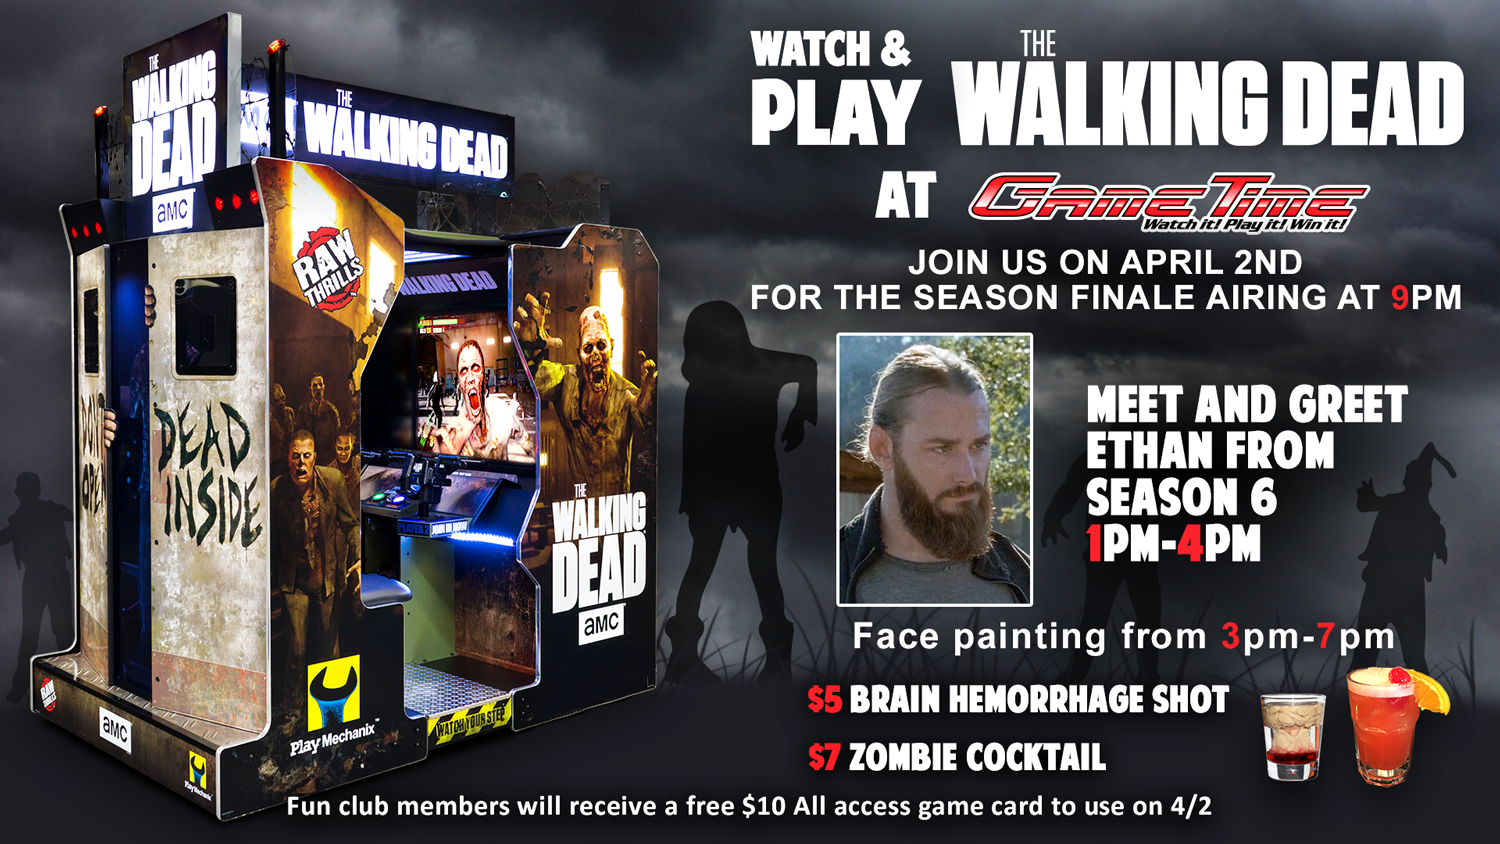 Watch and Play The Walking Dead at GameTime, meet “Ethan” at Season Finale Pre-Party